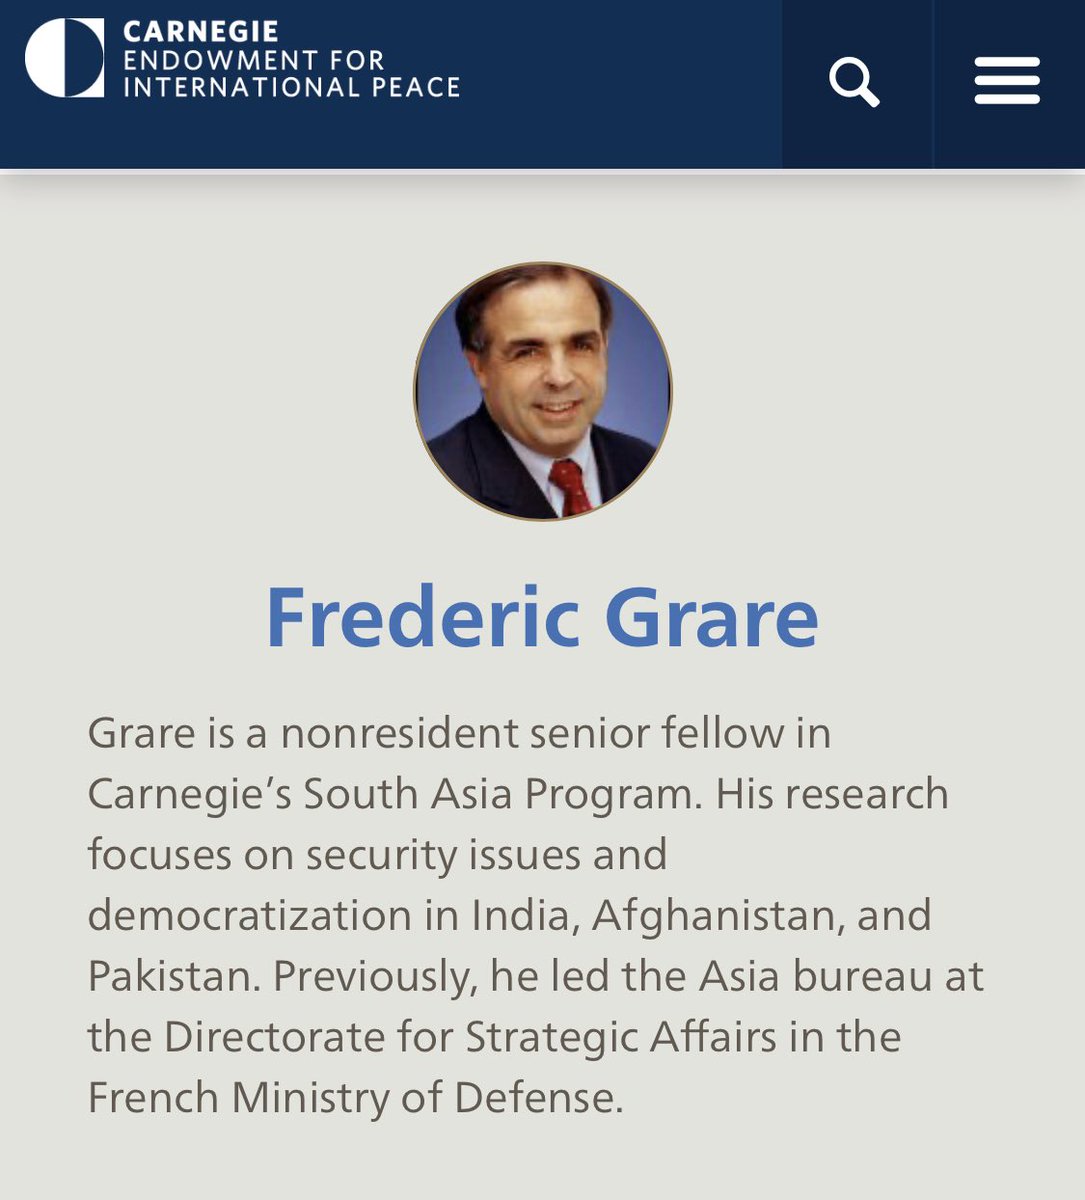 Author of the above report, the very same Frederic Grare is a former official of the French intelligence himself, who moved on to a position at the Carnegie’s Endowment’s India office as a Senior Fellow at South Asia Program.Surprise, surprise! #IndiaWagingHybridWar/65